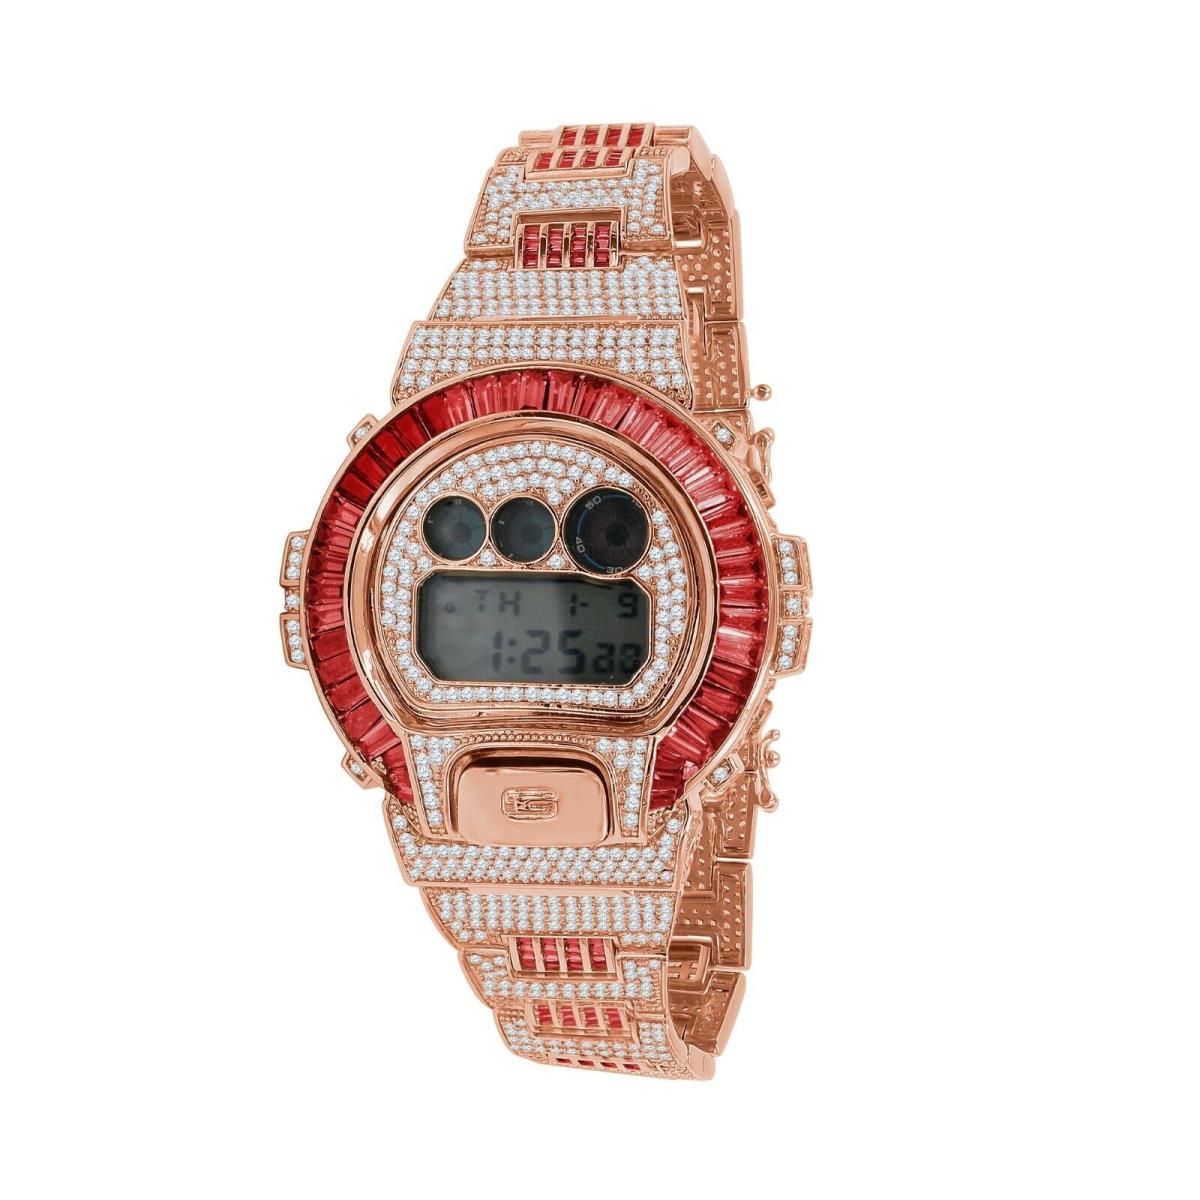 Icy Red Ruby Baguettes On Rose Gold Finish Casio G-shock DW-6900 Watch